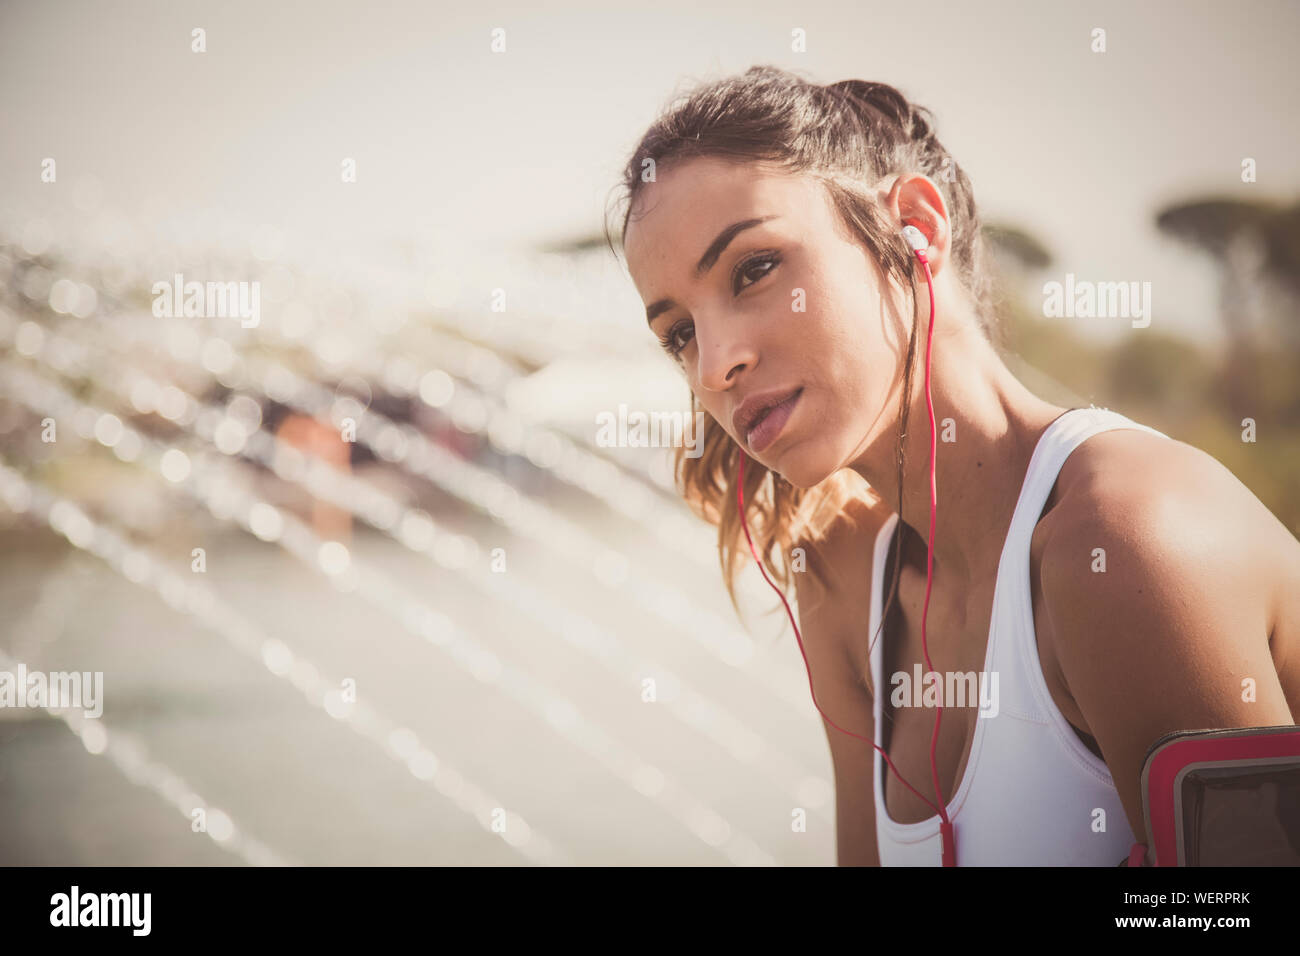 Portrait Of Young Woman In Sports Clothing By Fountain Stock Photo